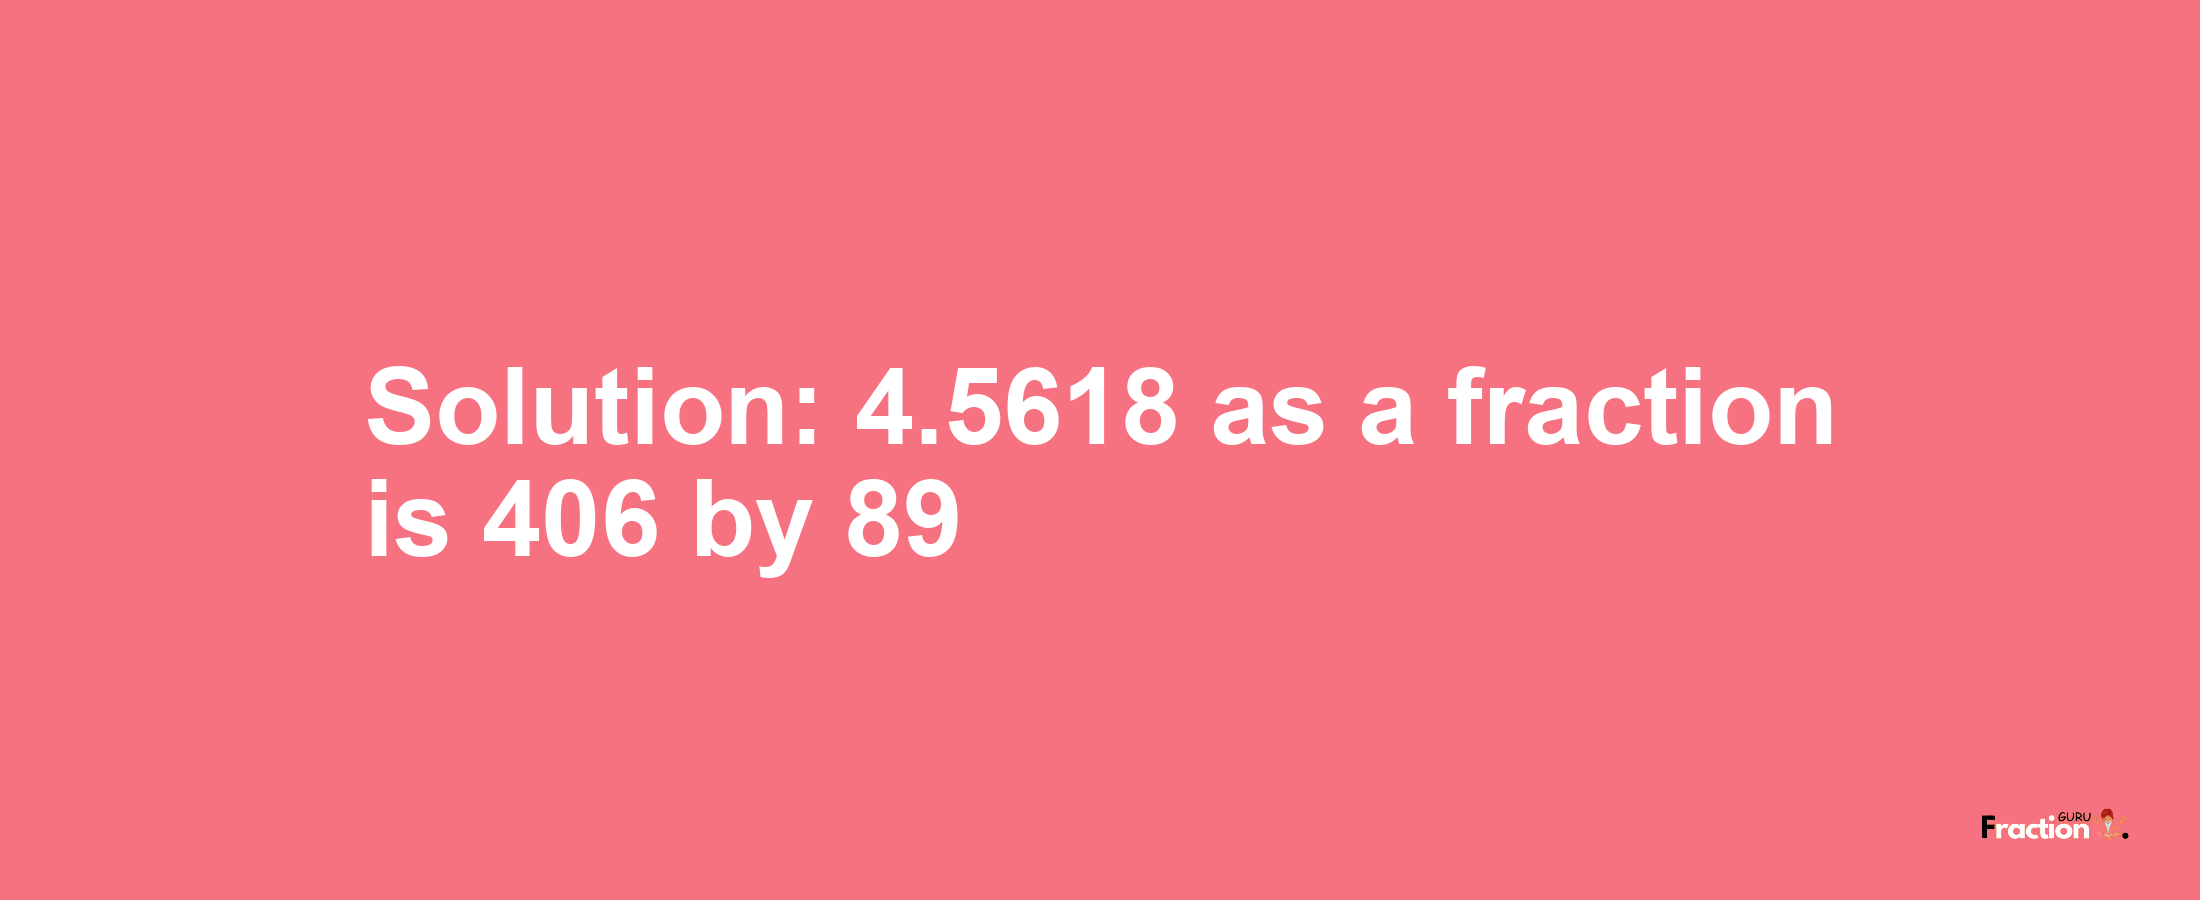 Solution:4.5618 as a fraction is 406/89